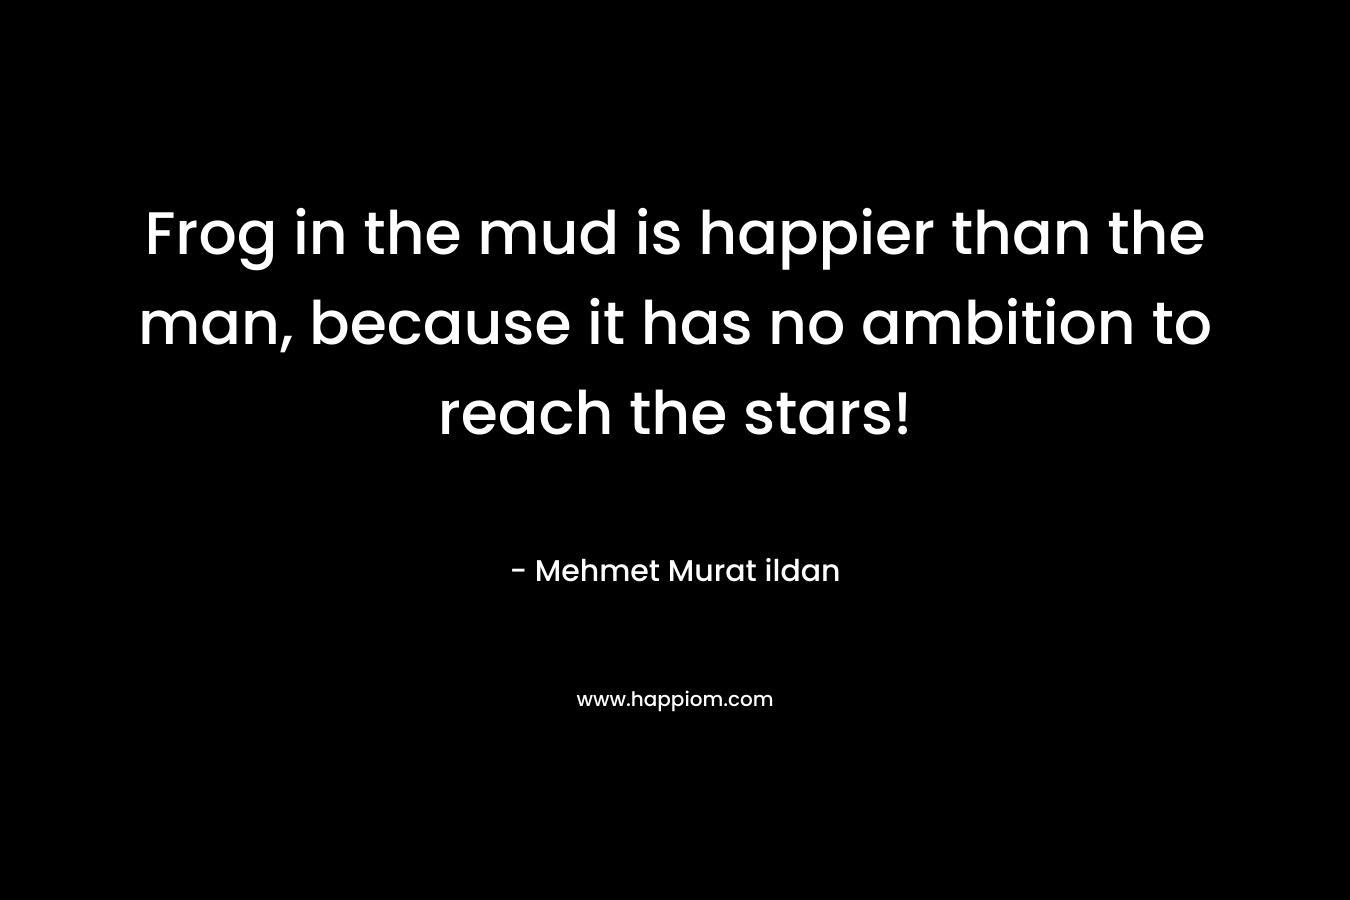 Frog in the mud is happier than the man, because it has no ambition to reach the stars! – Mehmet Murat ildan